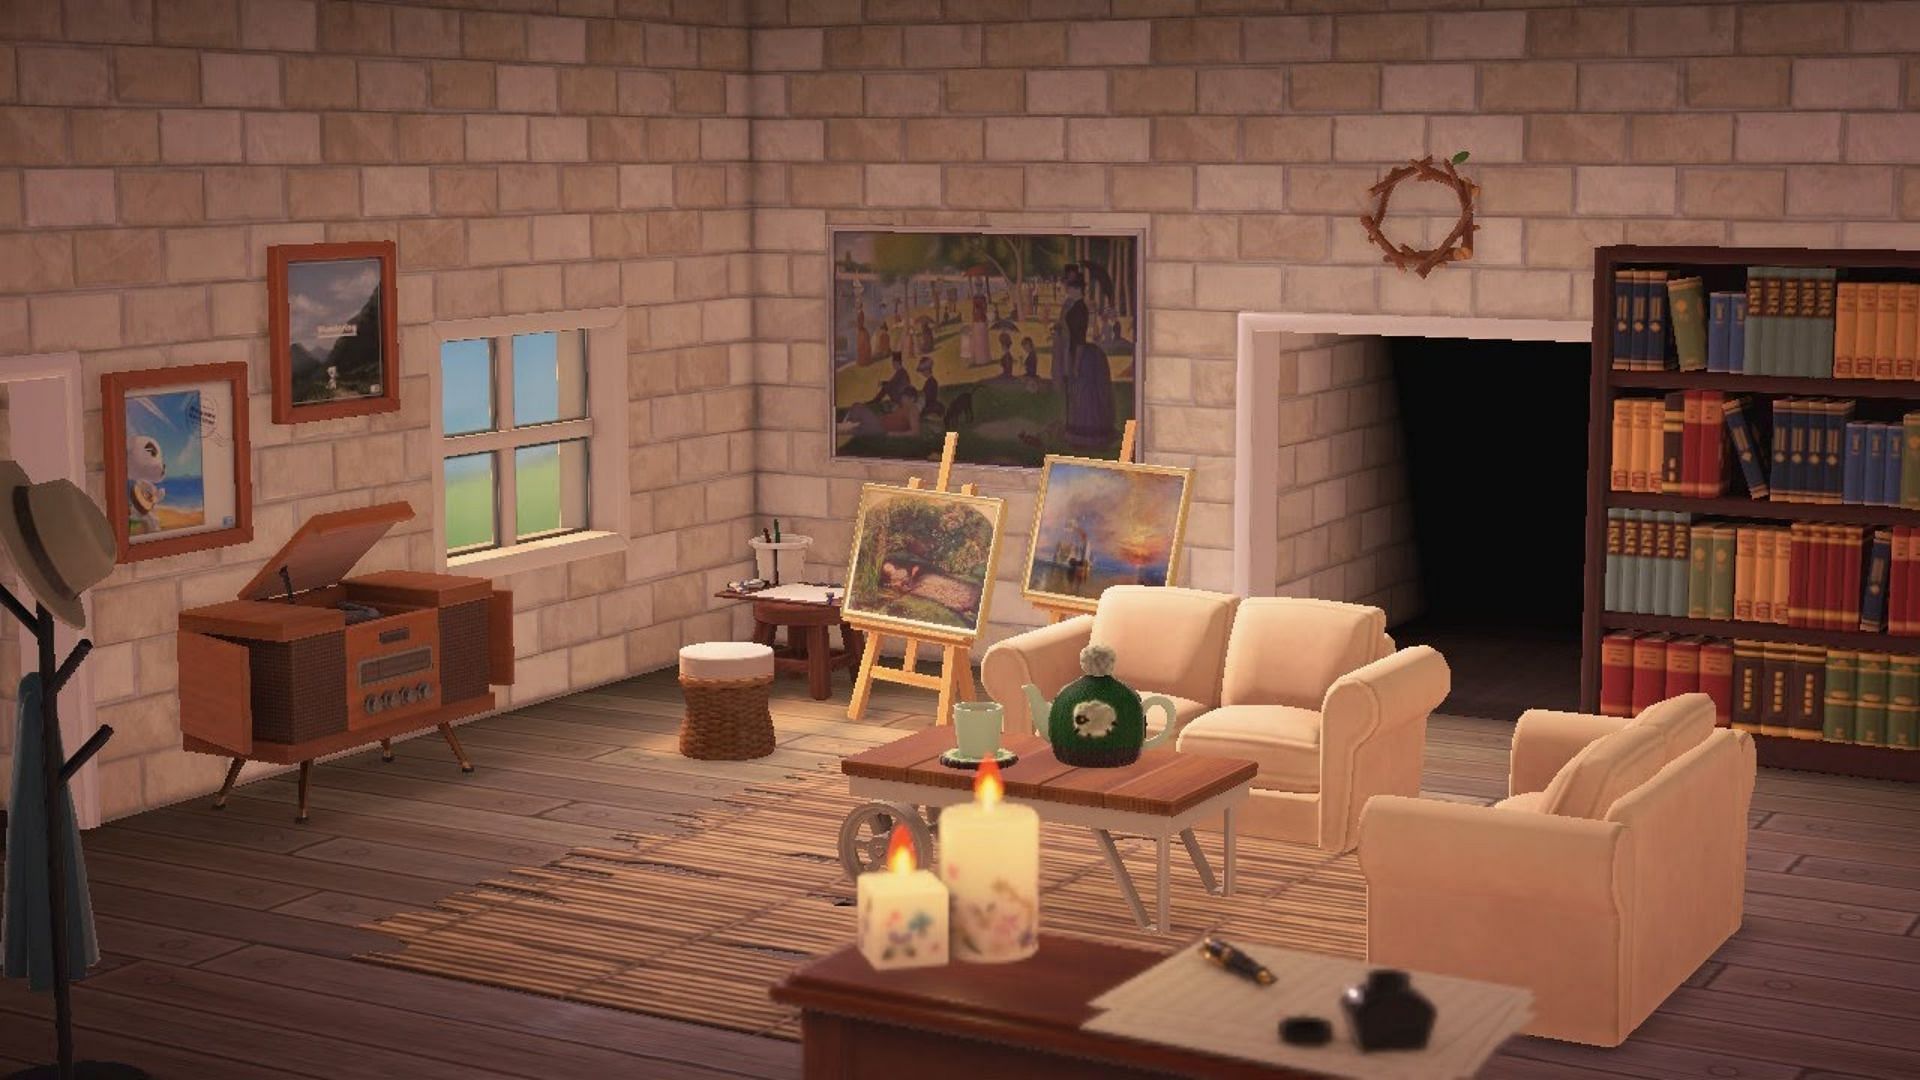 Animal Crossing: New Horizons players can create accent walls in their homes in the game (Image via WildRainTV/YouTube)